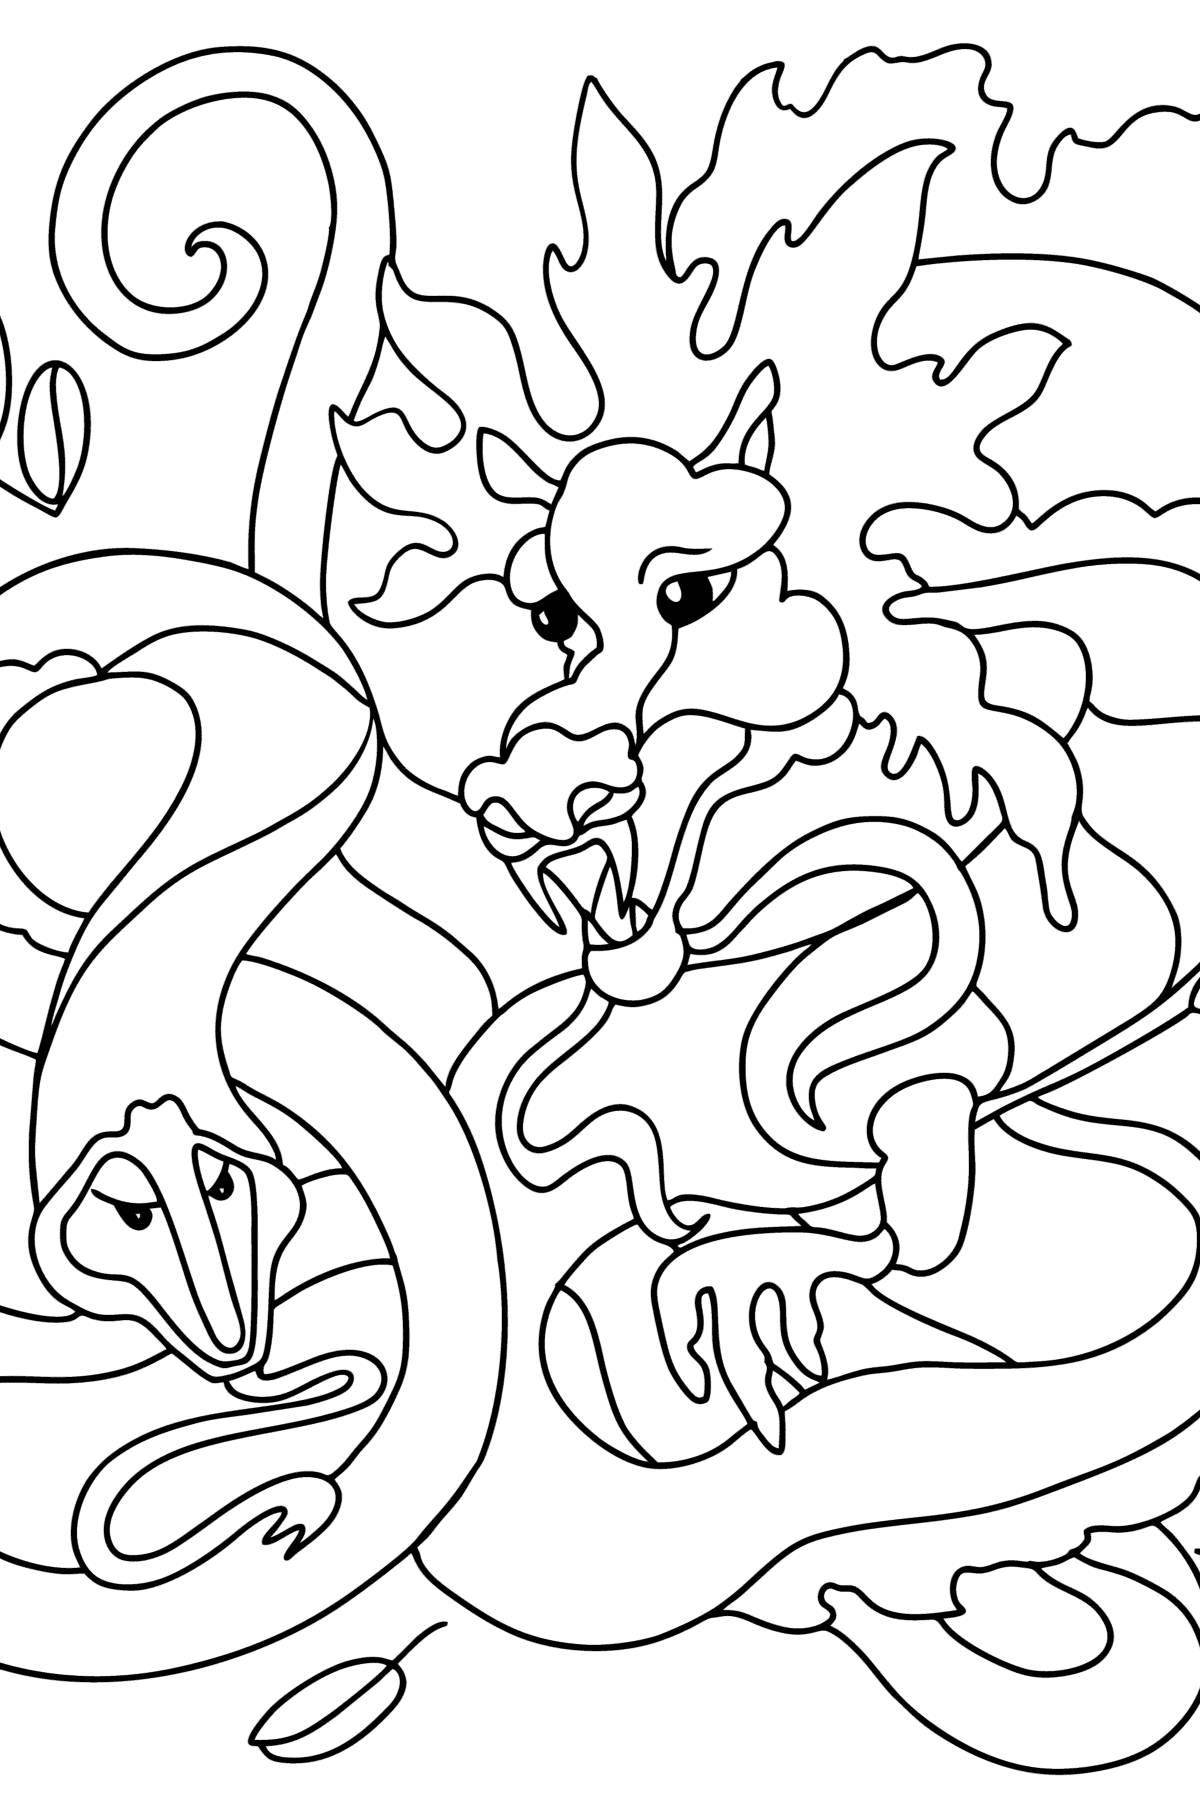 Charming year of the dragon coloring book